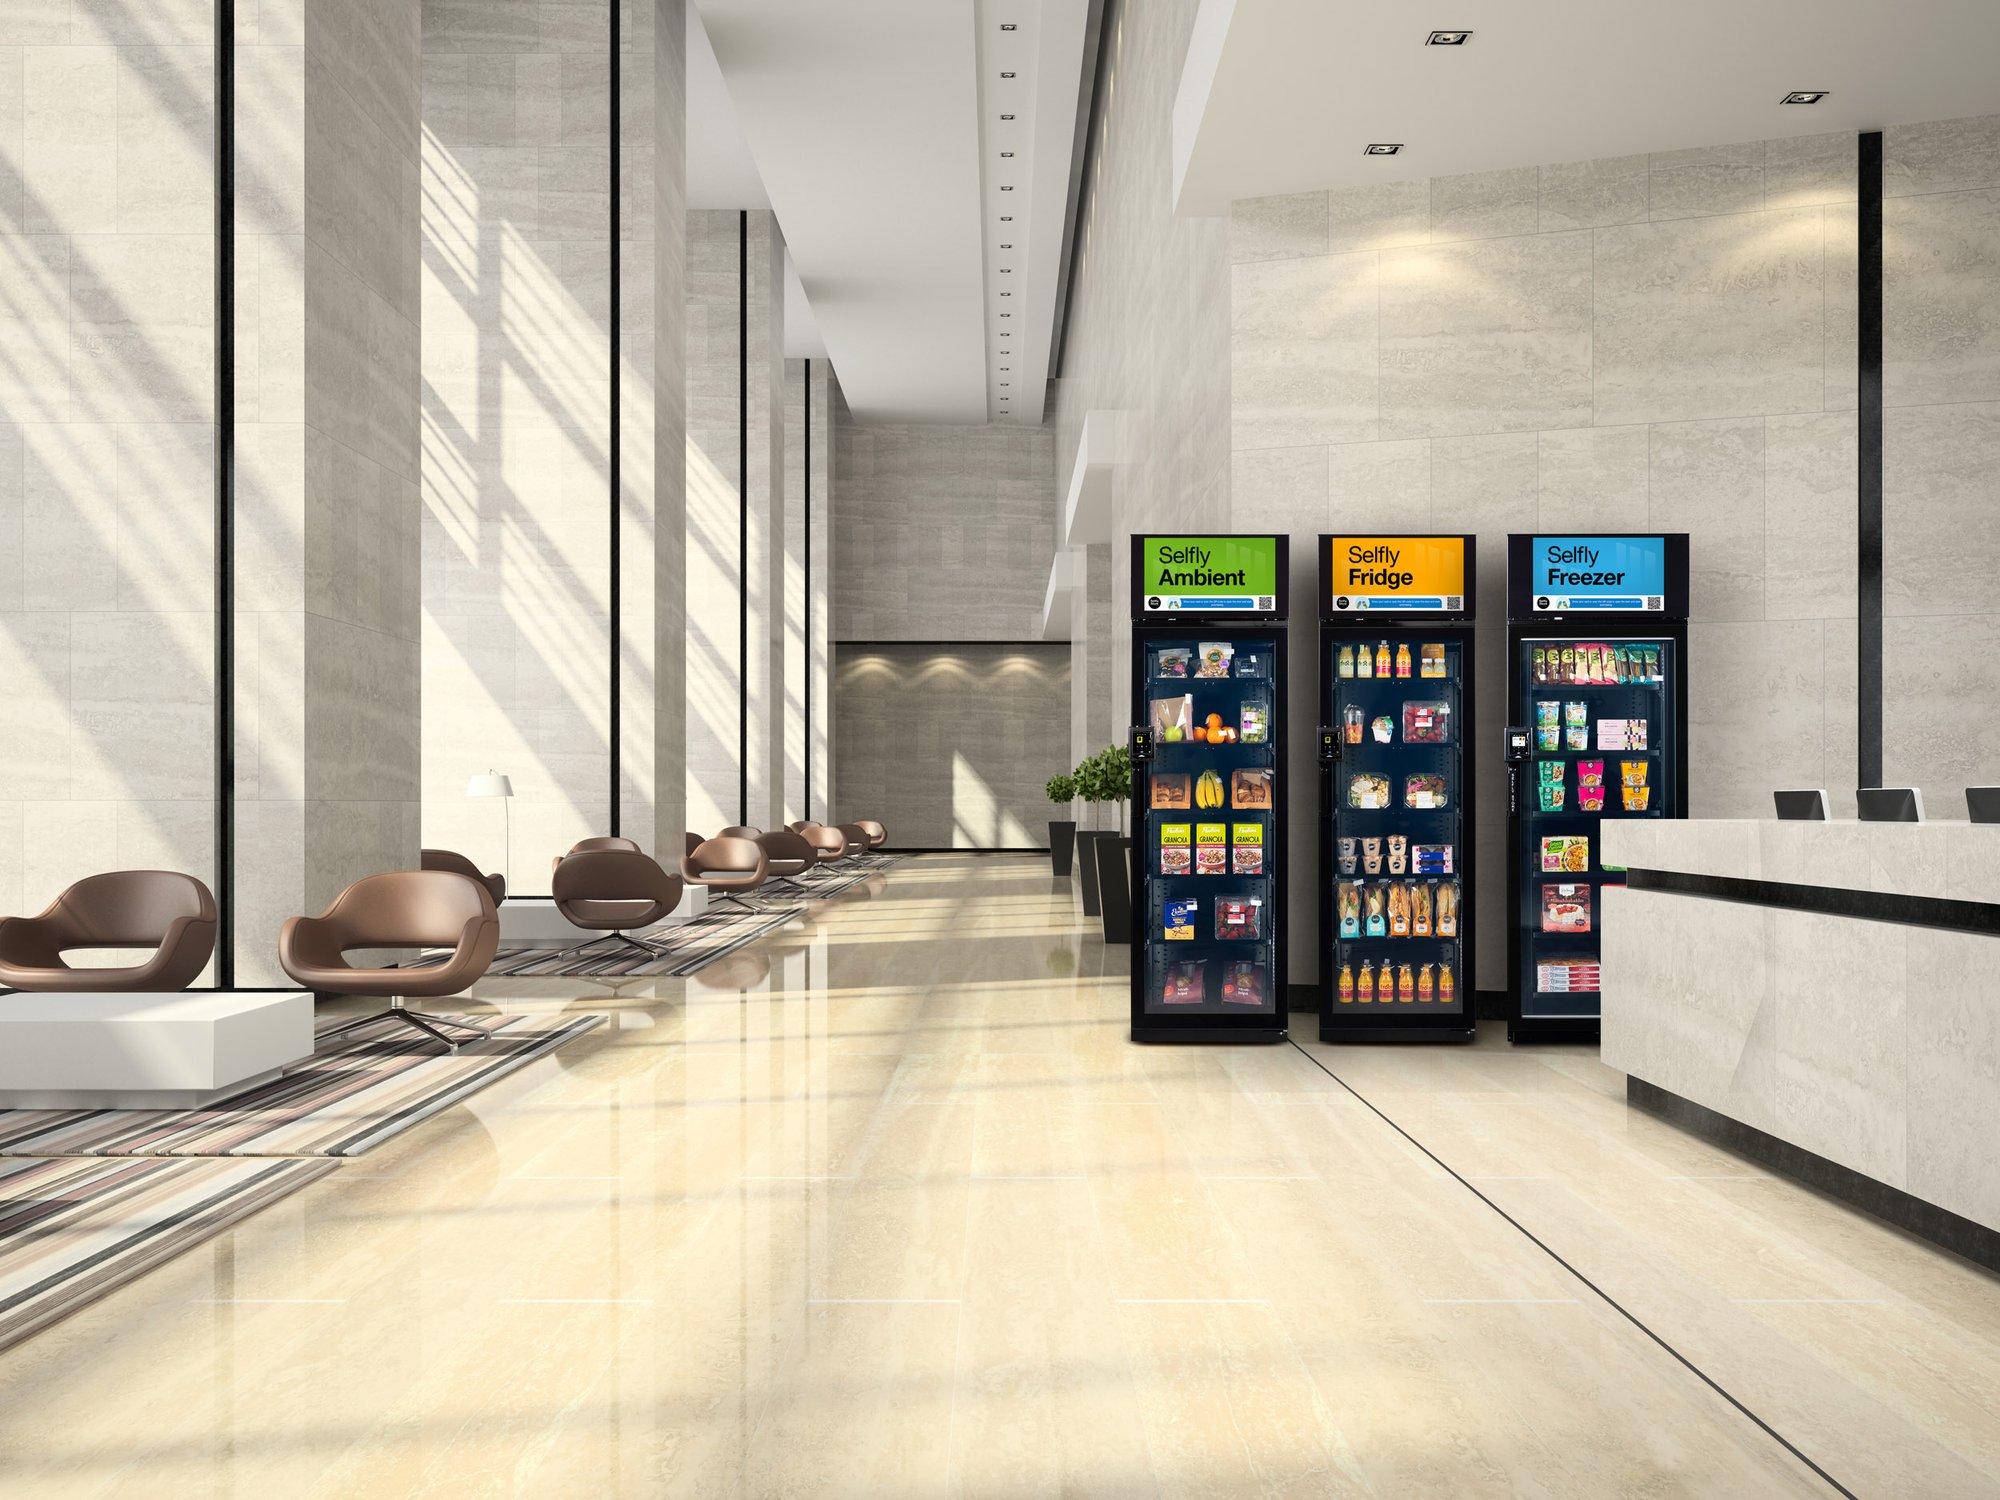 Smart vending machines in a hotel lobby